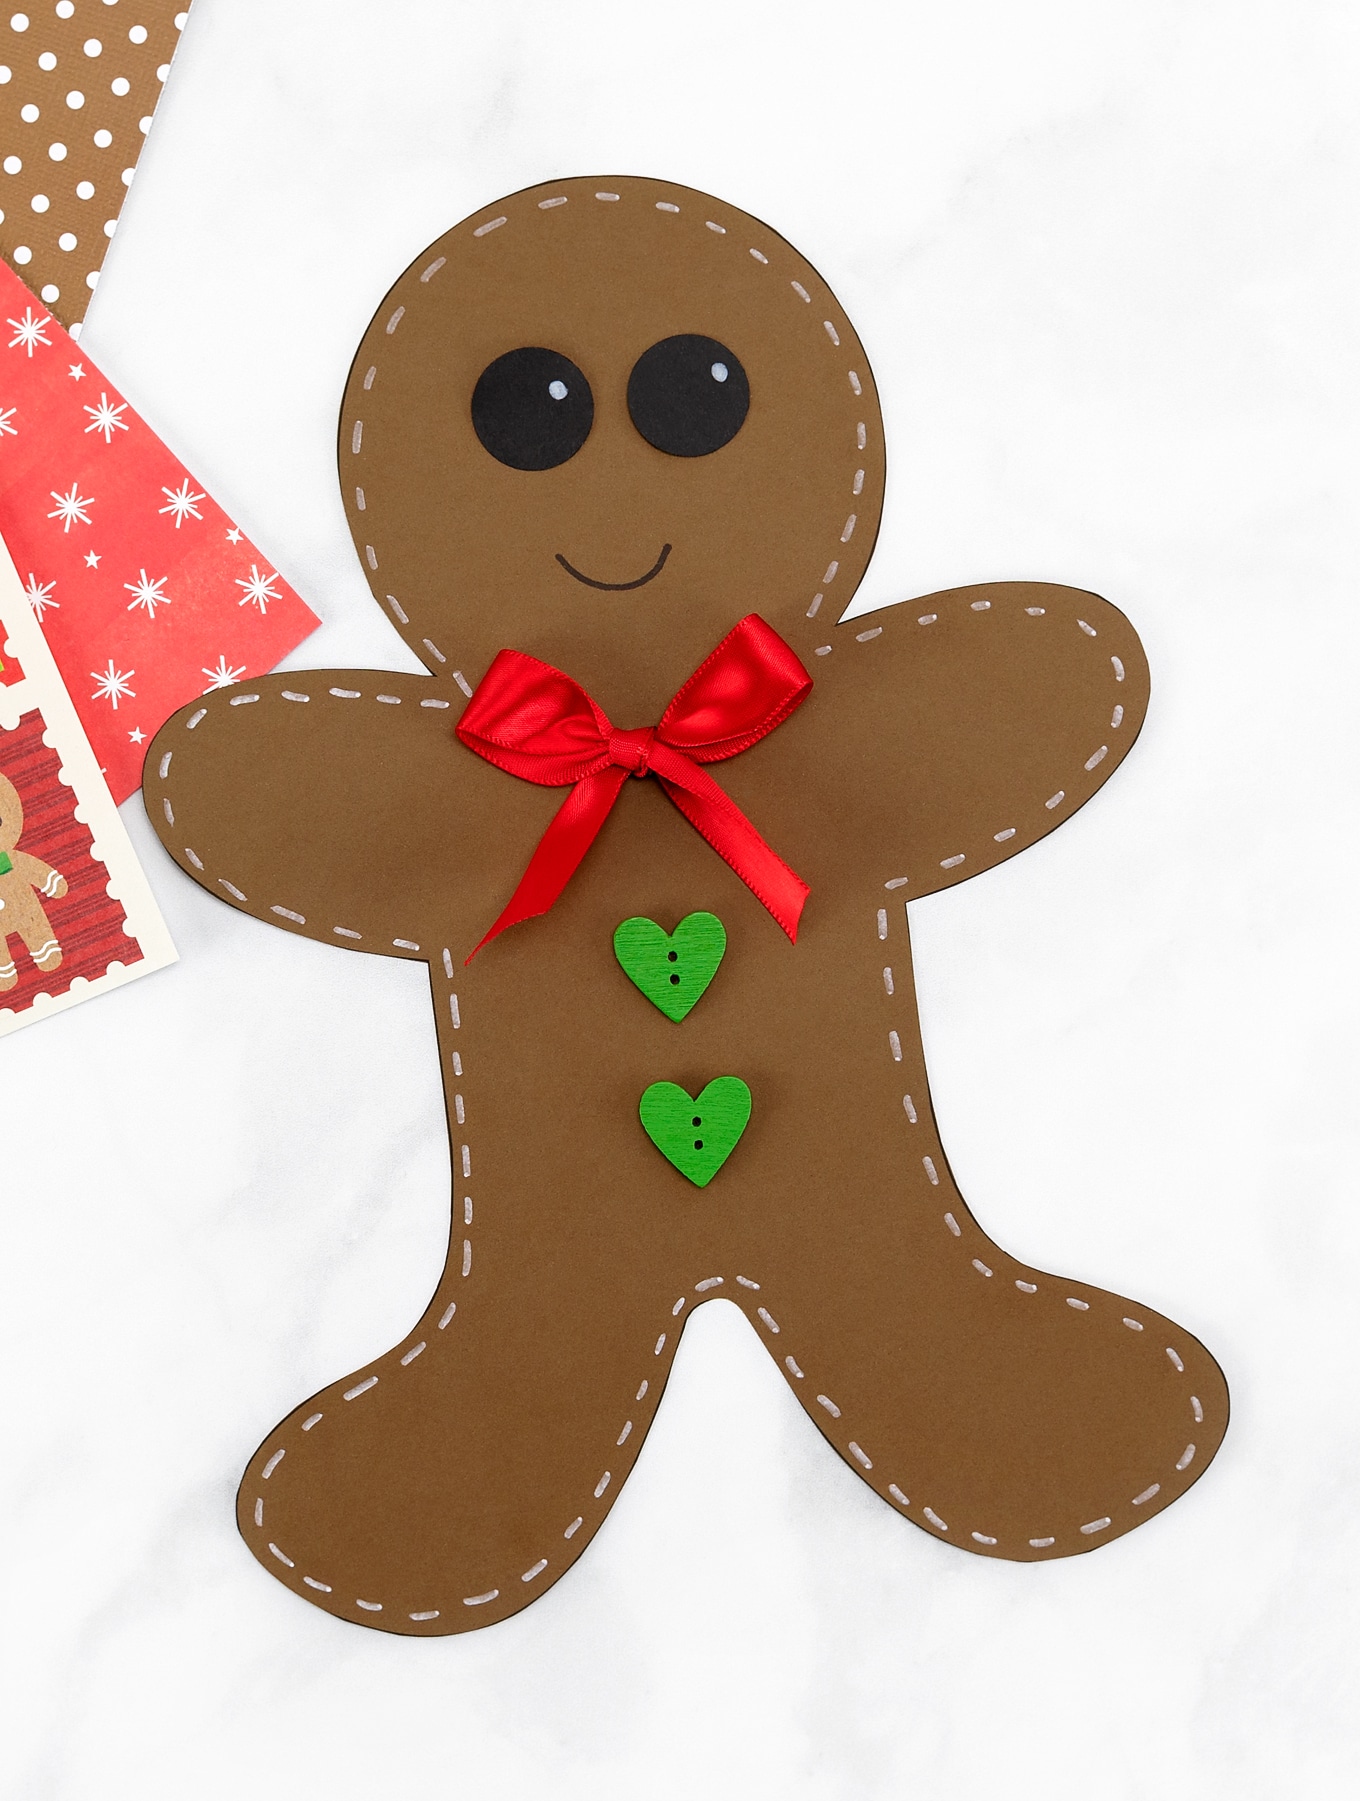 Gingerbread Man Template Fireflies And Mud Pies